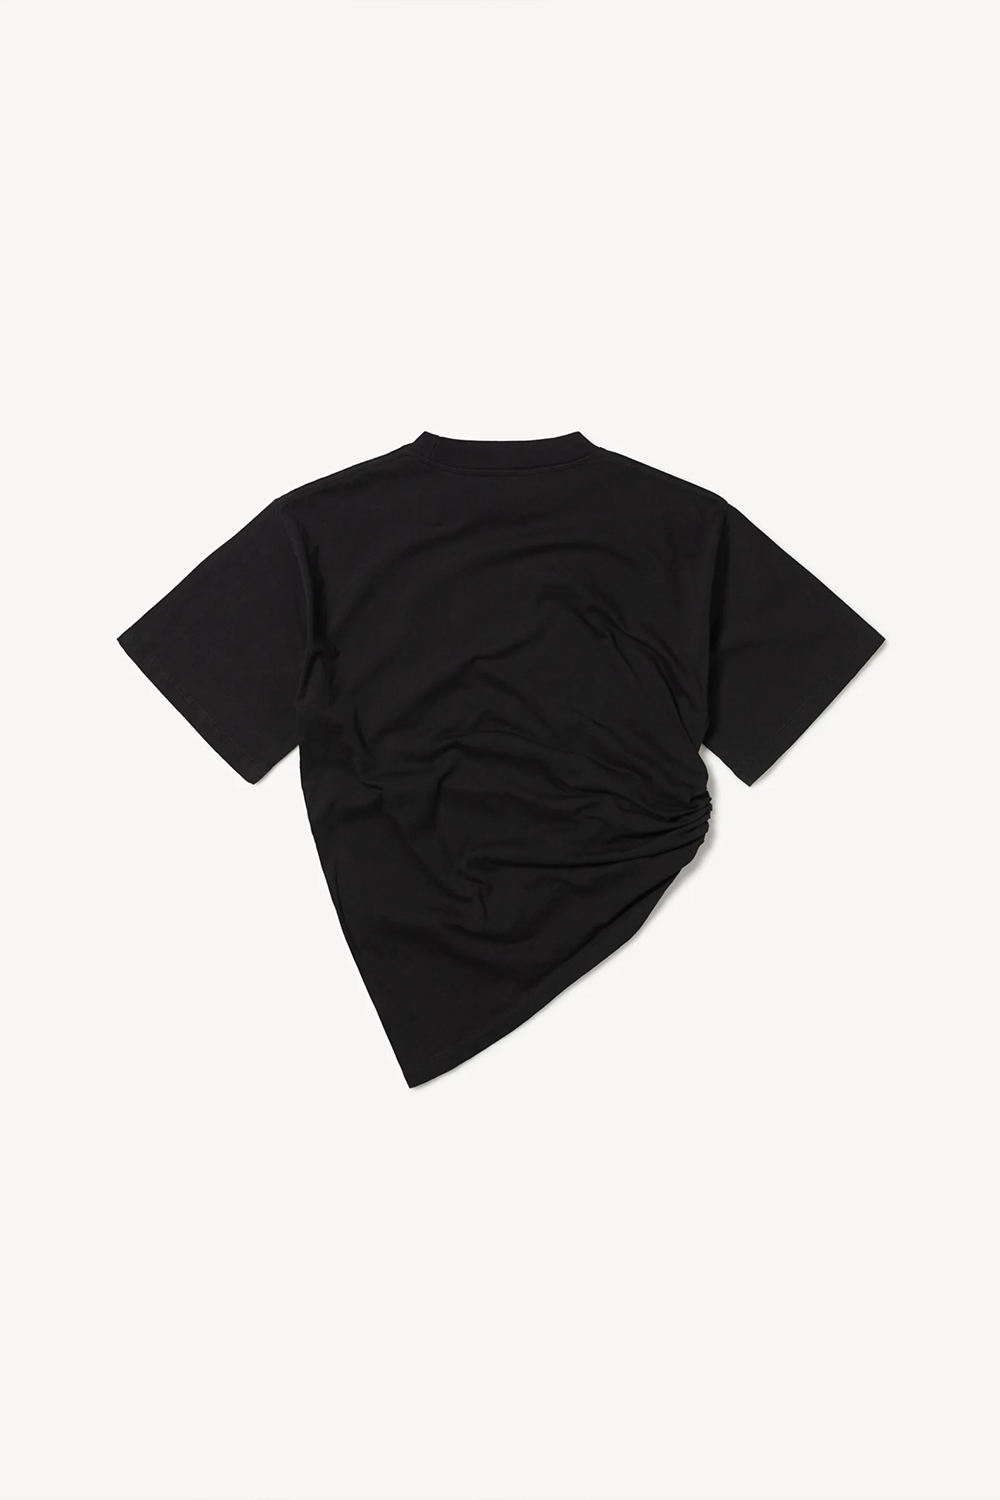 SCAN TEMPLE RING TEE